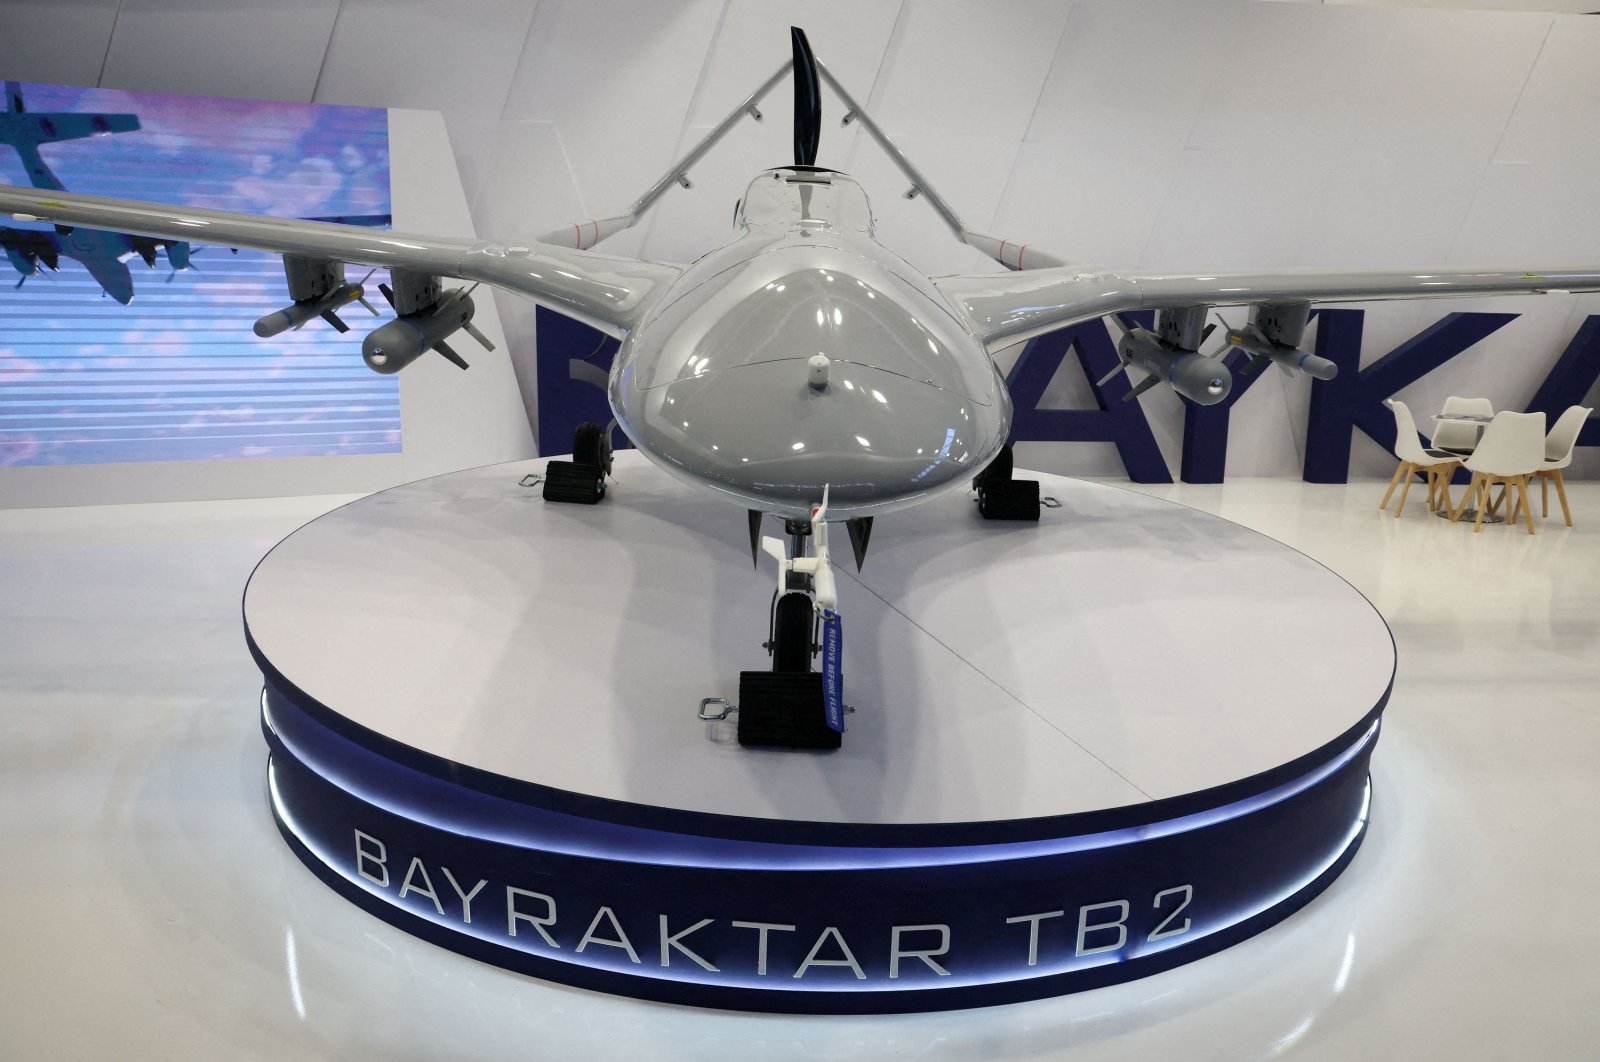 A Bayraktar TB2 drone stands near the logo of the Turkish defense company Baykar inside a hall of the 30th international Defence Industry Exhibition in Kielce, Poland, Sept. 5, 2022. (Reuters Photo)